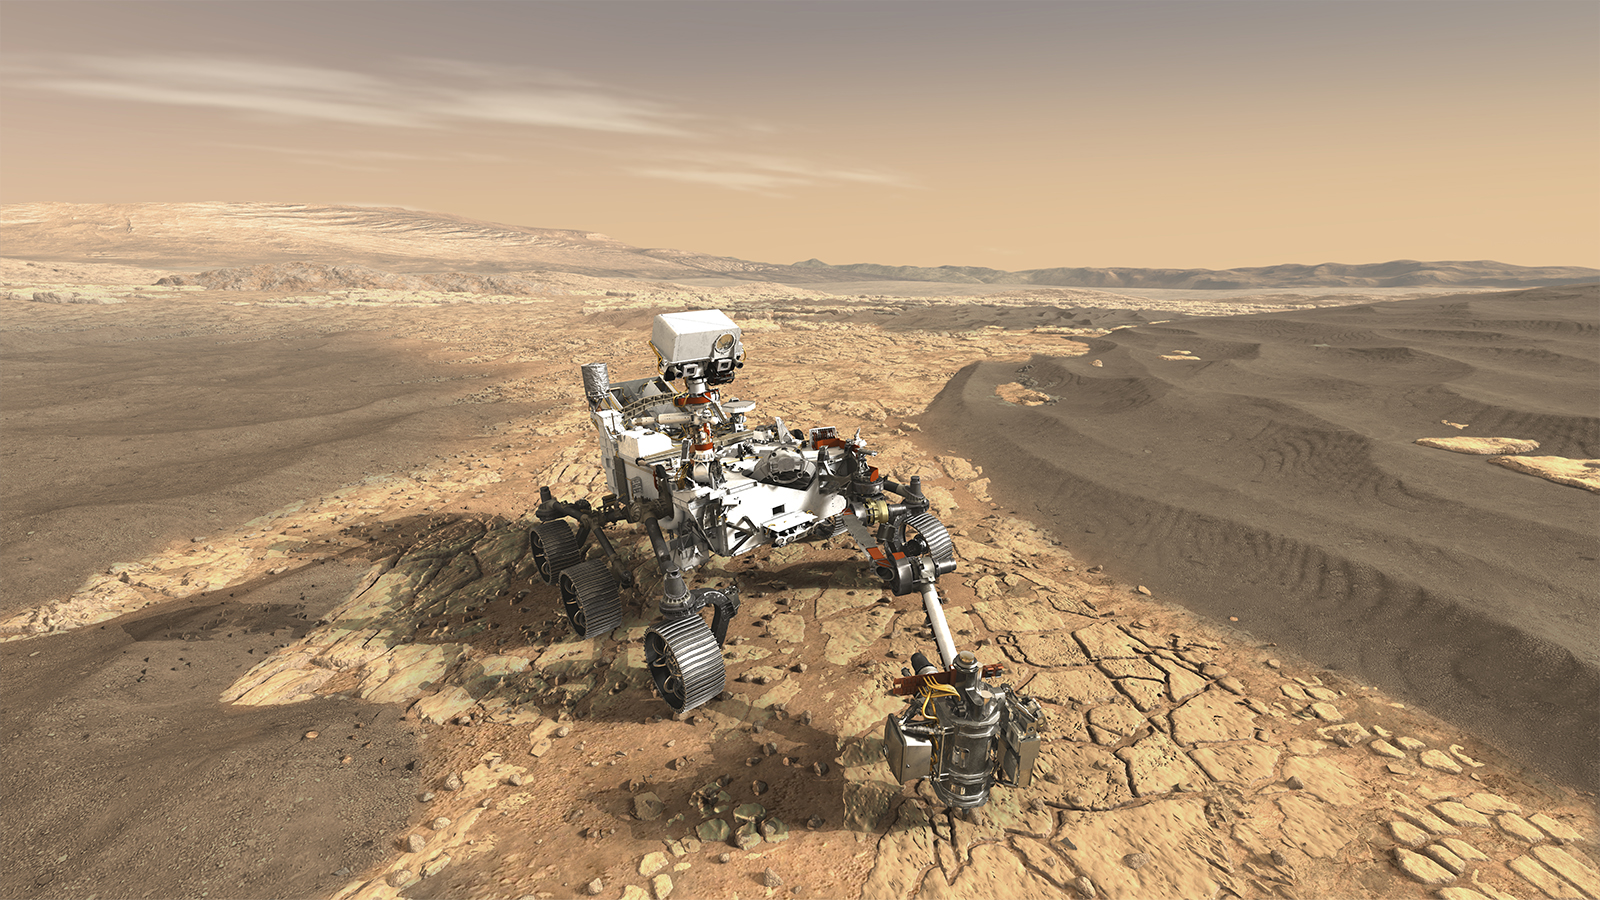 NASA’s 2020 rover will search Mars for signs of life